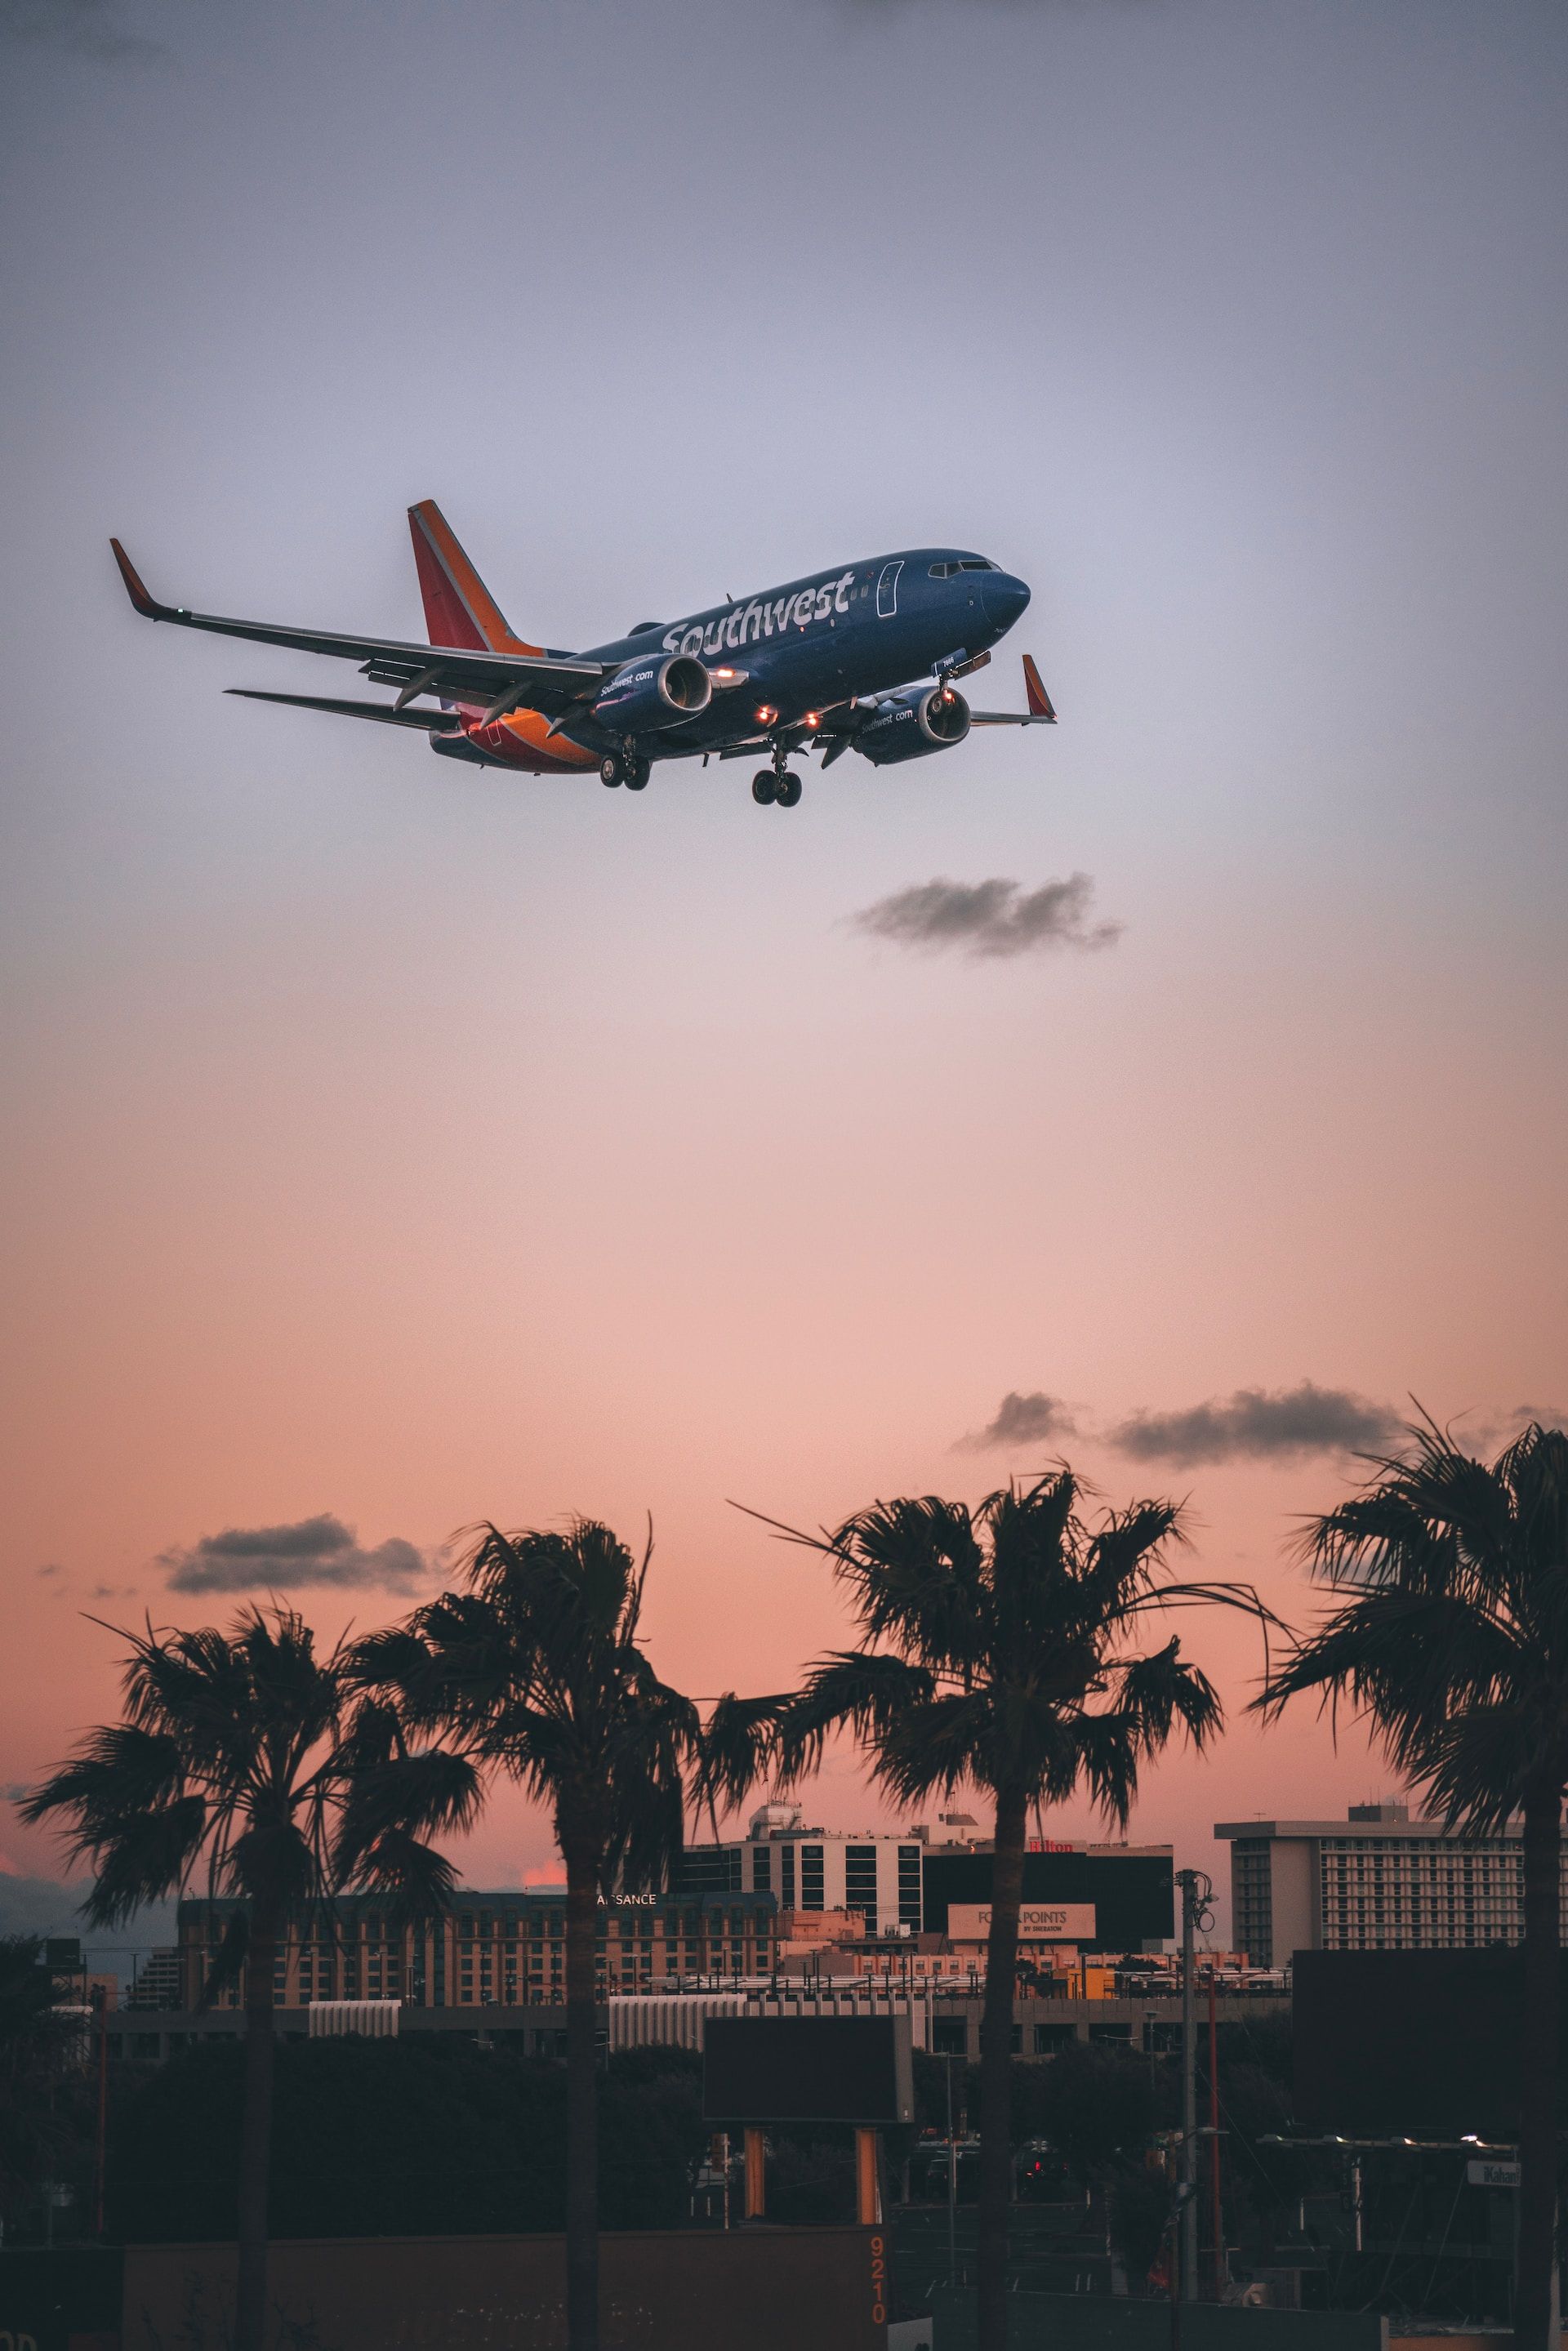 A Southwest Airlines jet landing in LAX